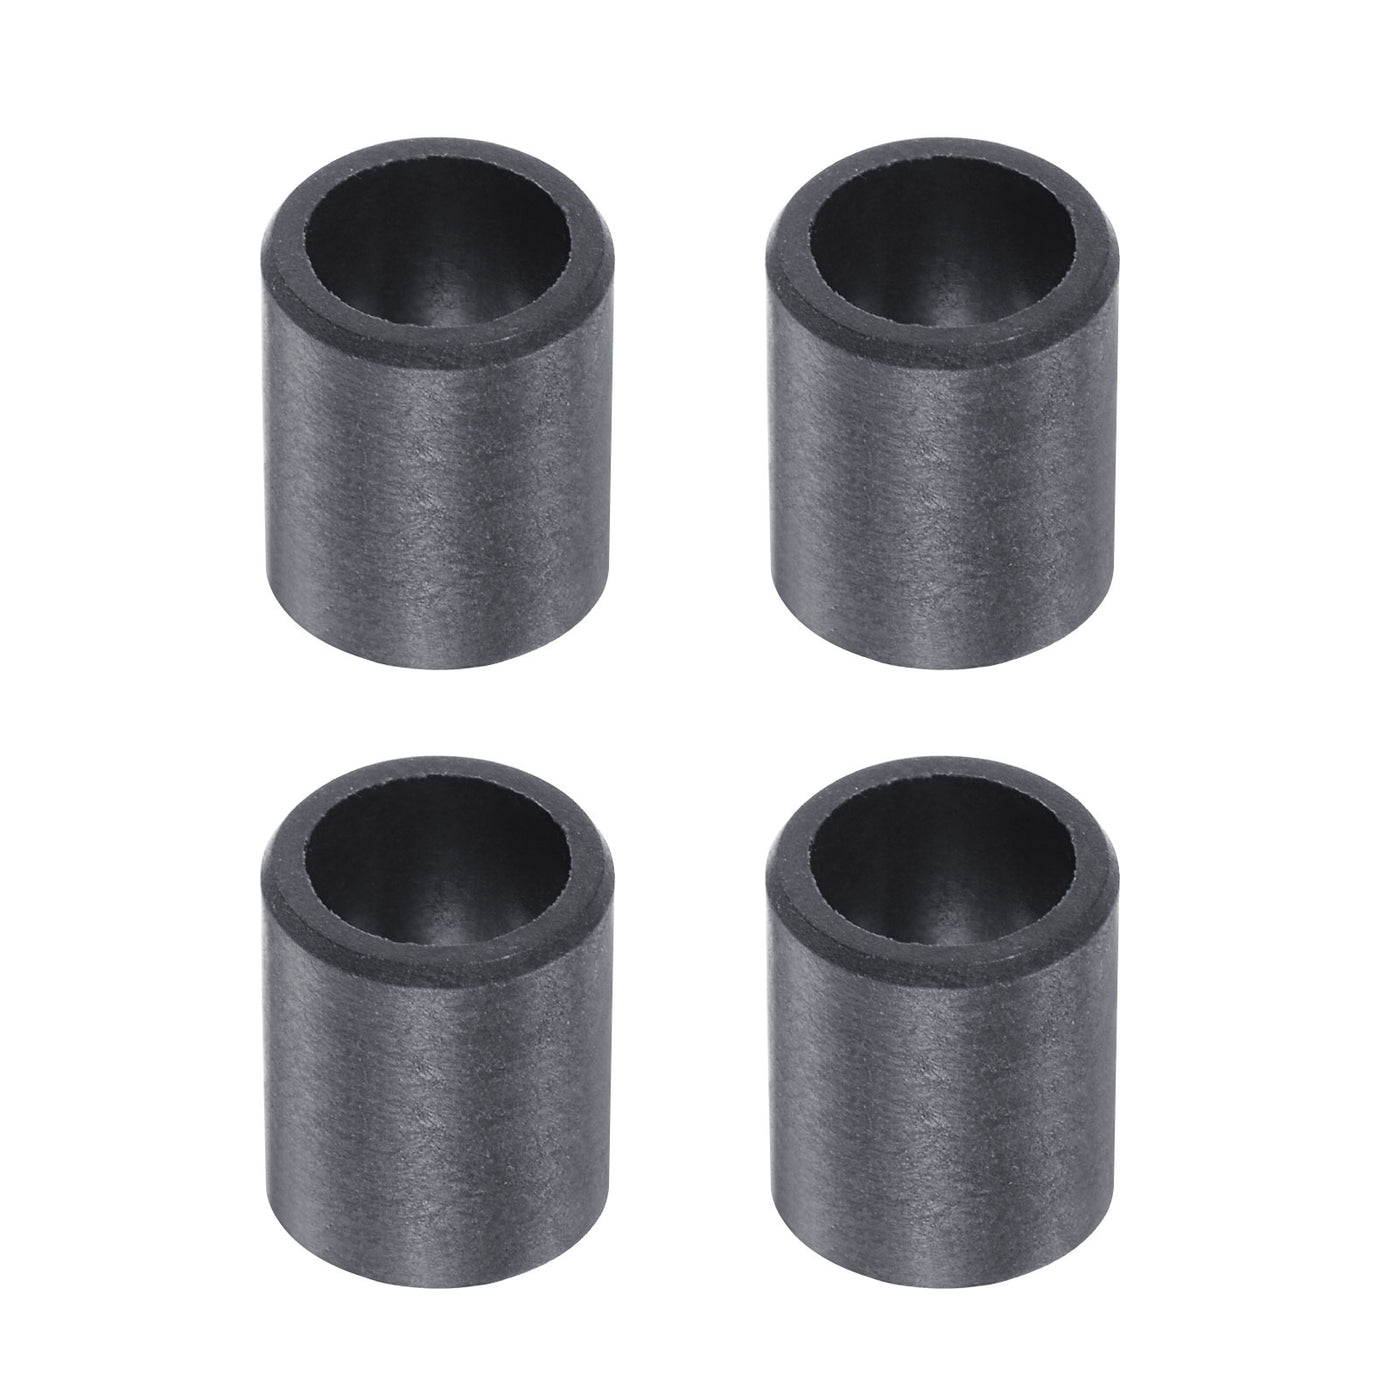 uxcell Uxcell Sleeve Bearings 6mmx8mmx10mm POM Wrapped Oilless Bushings Black 4pcs